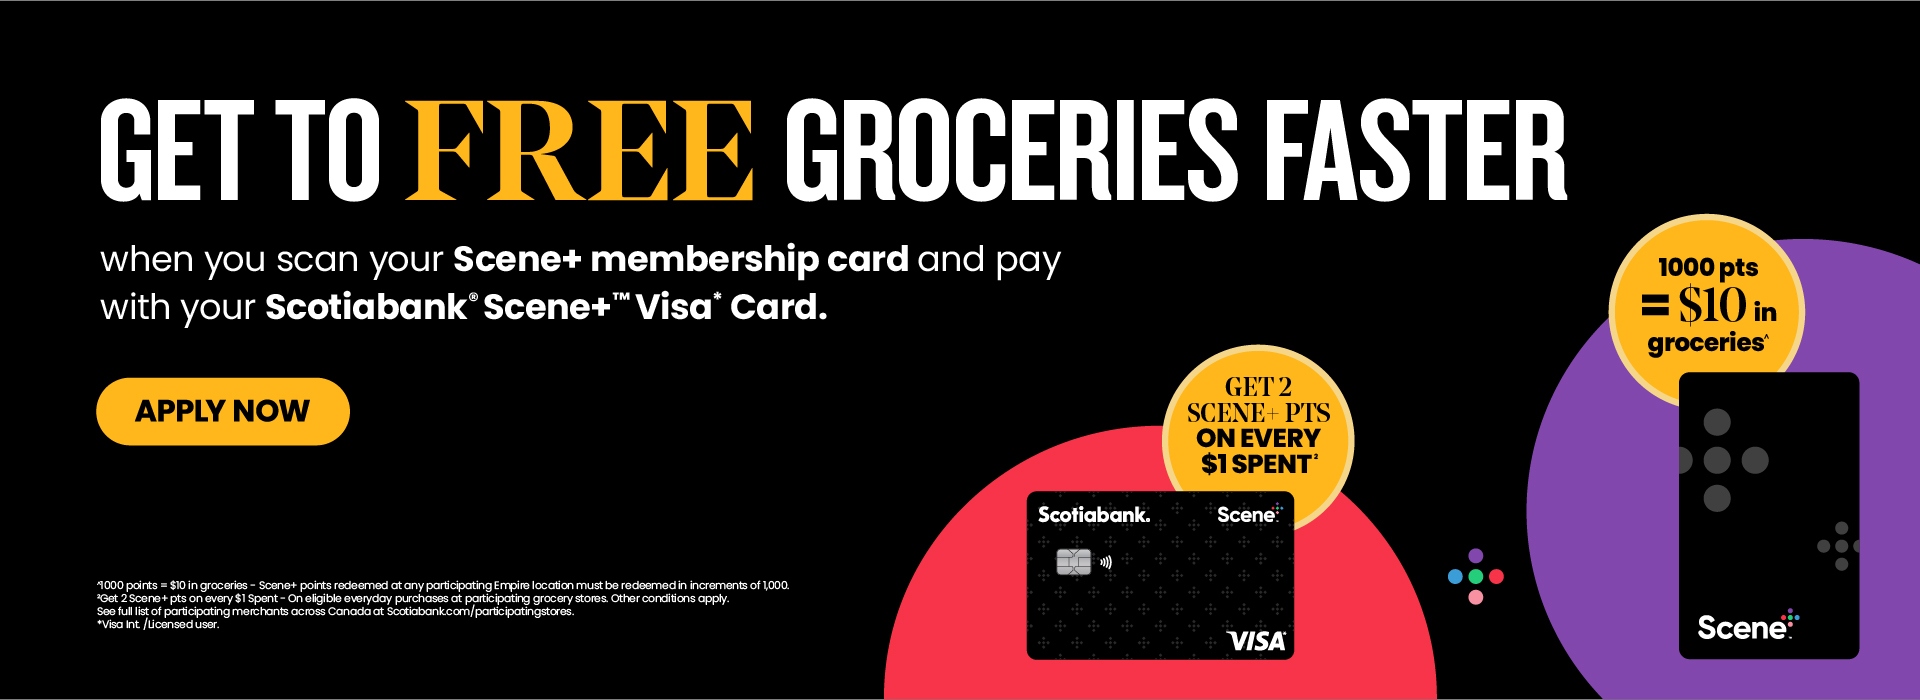 Advertisement for a Scotiabank Scene+ Visa Card. The text highlights the benefit of earning free groceries by earning Scene+ points with every dollar spent. Includes images of Scene+ membership and Visa cards, along with a "Get 2 Scene+ points on every $1 spent" offer.